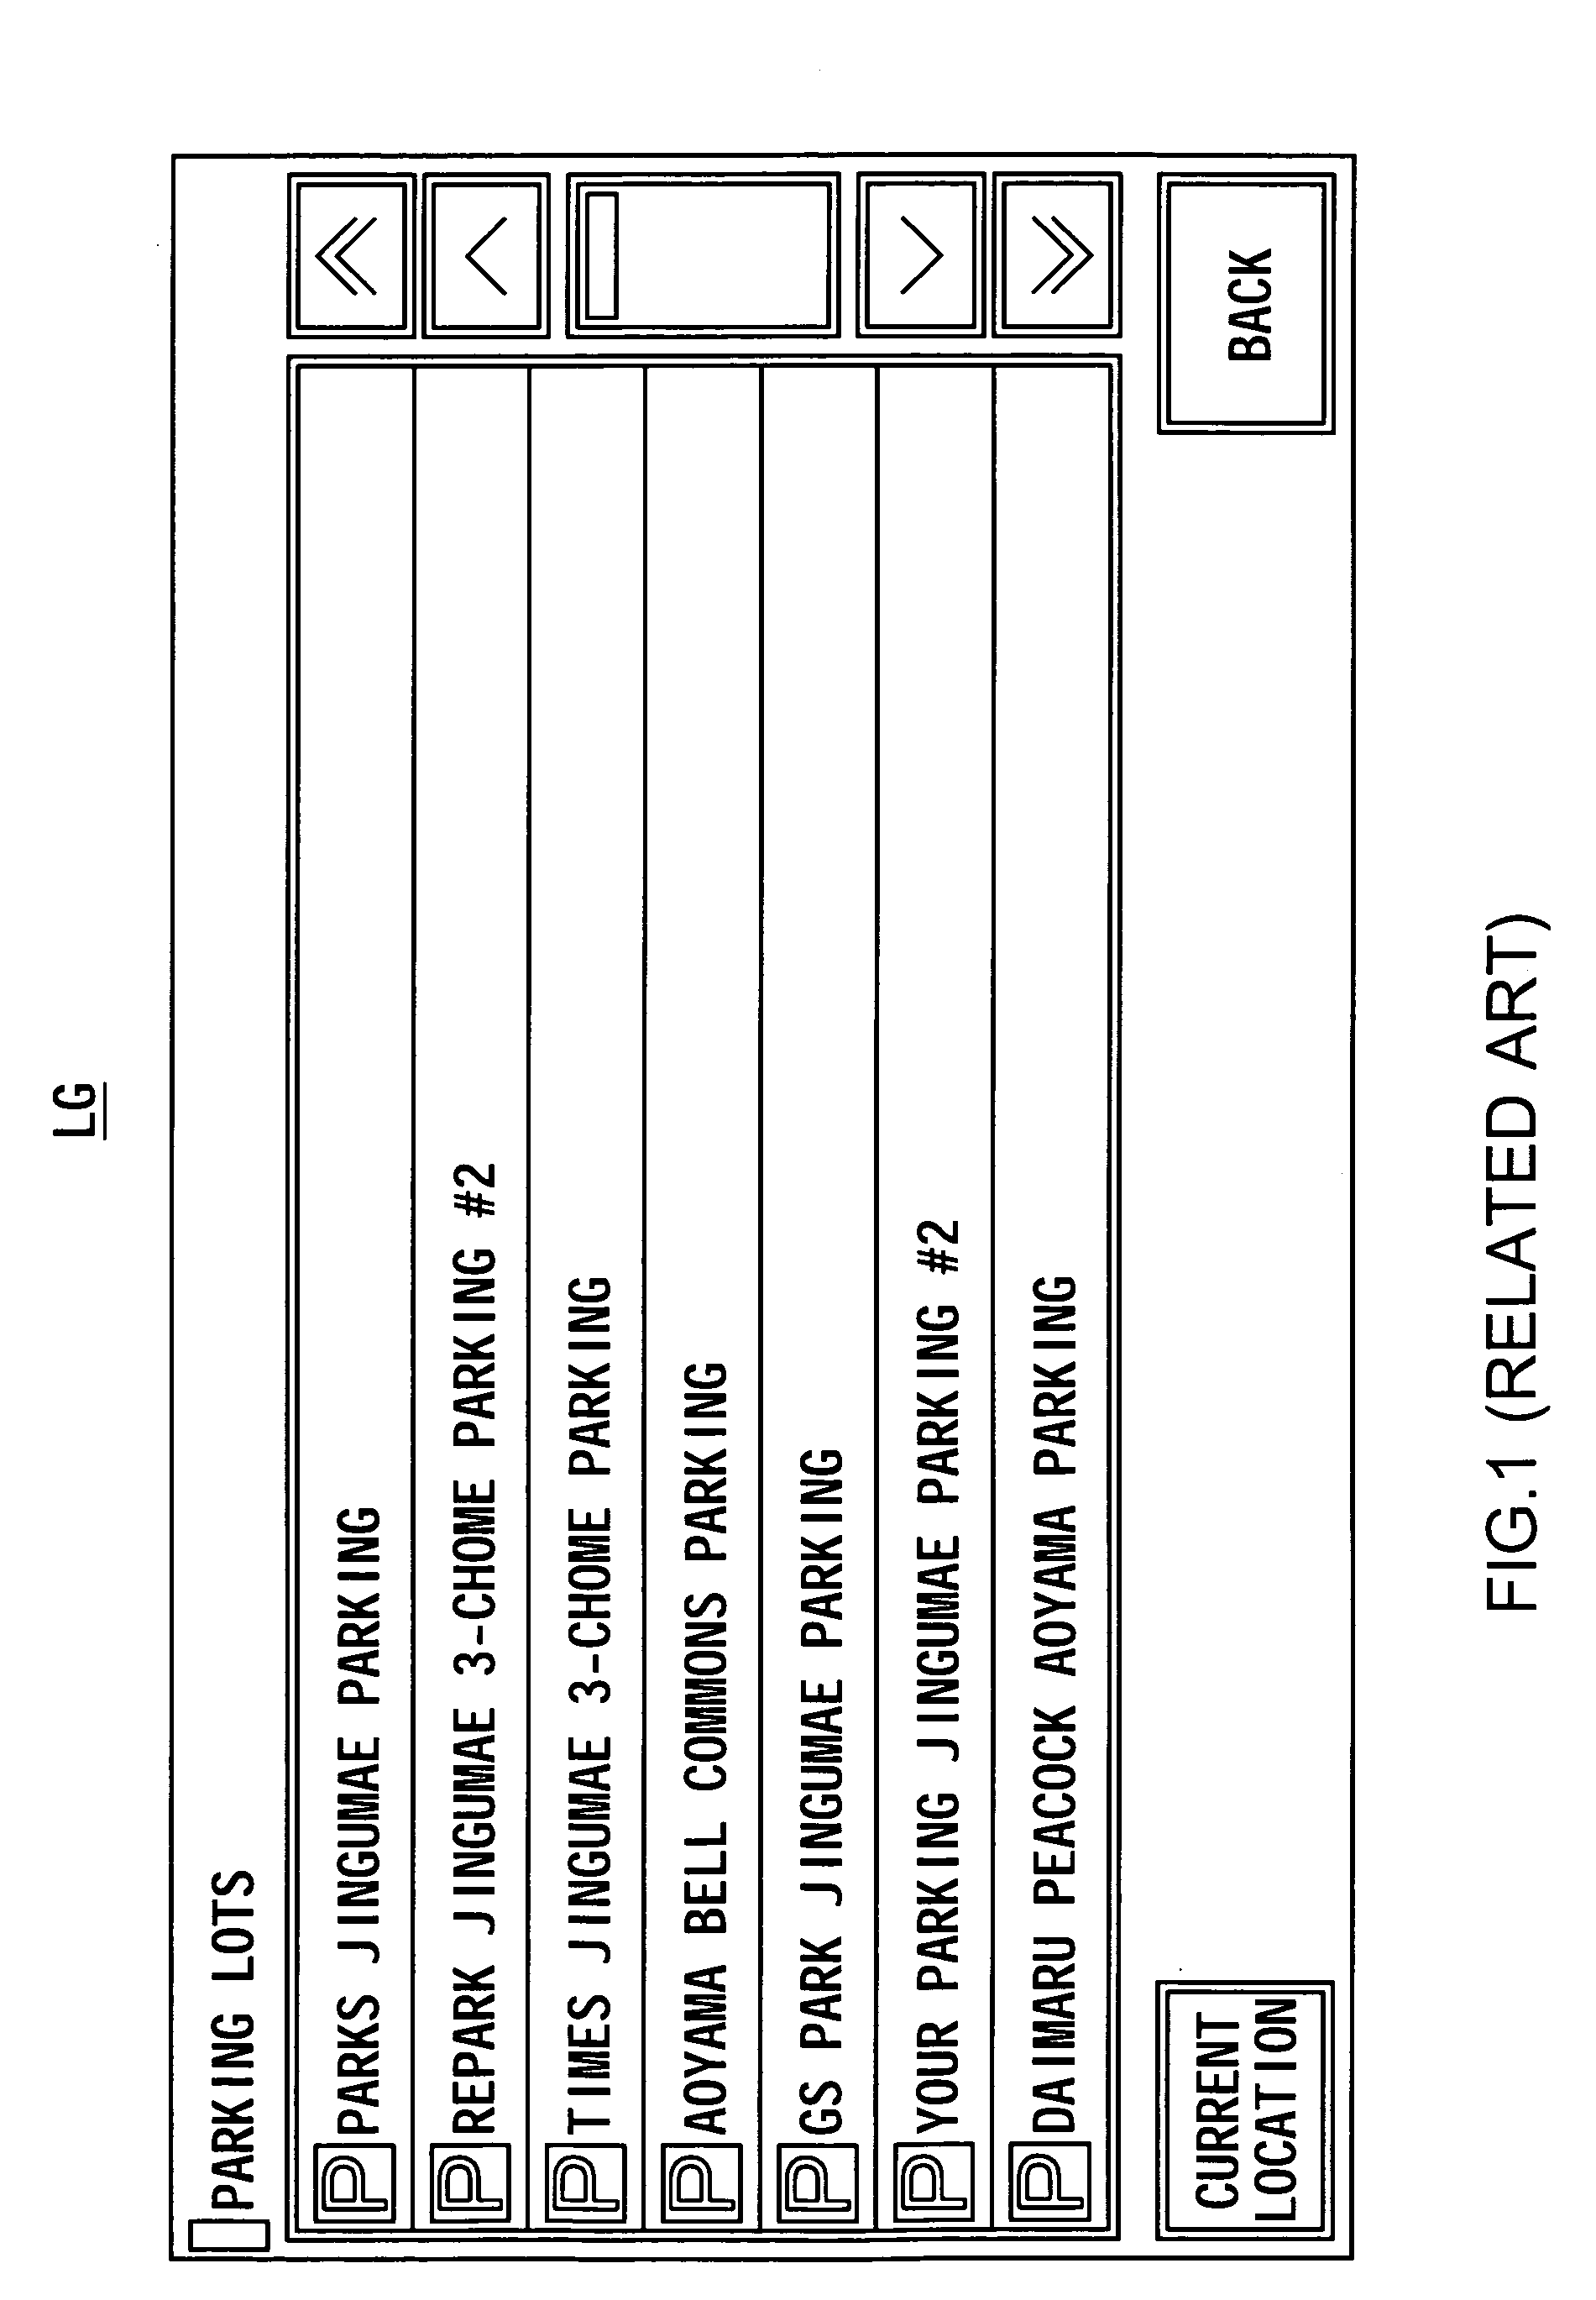 Navigation apparatus, search result display method, and graphical user interface